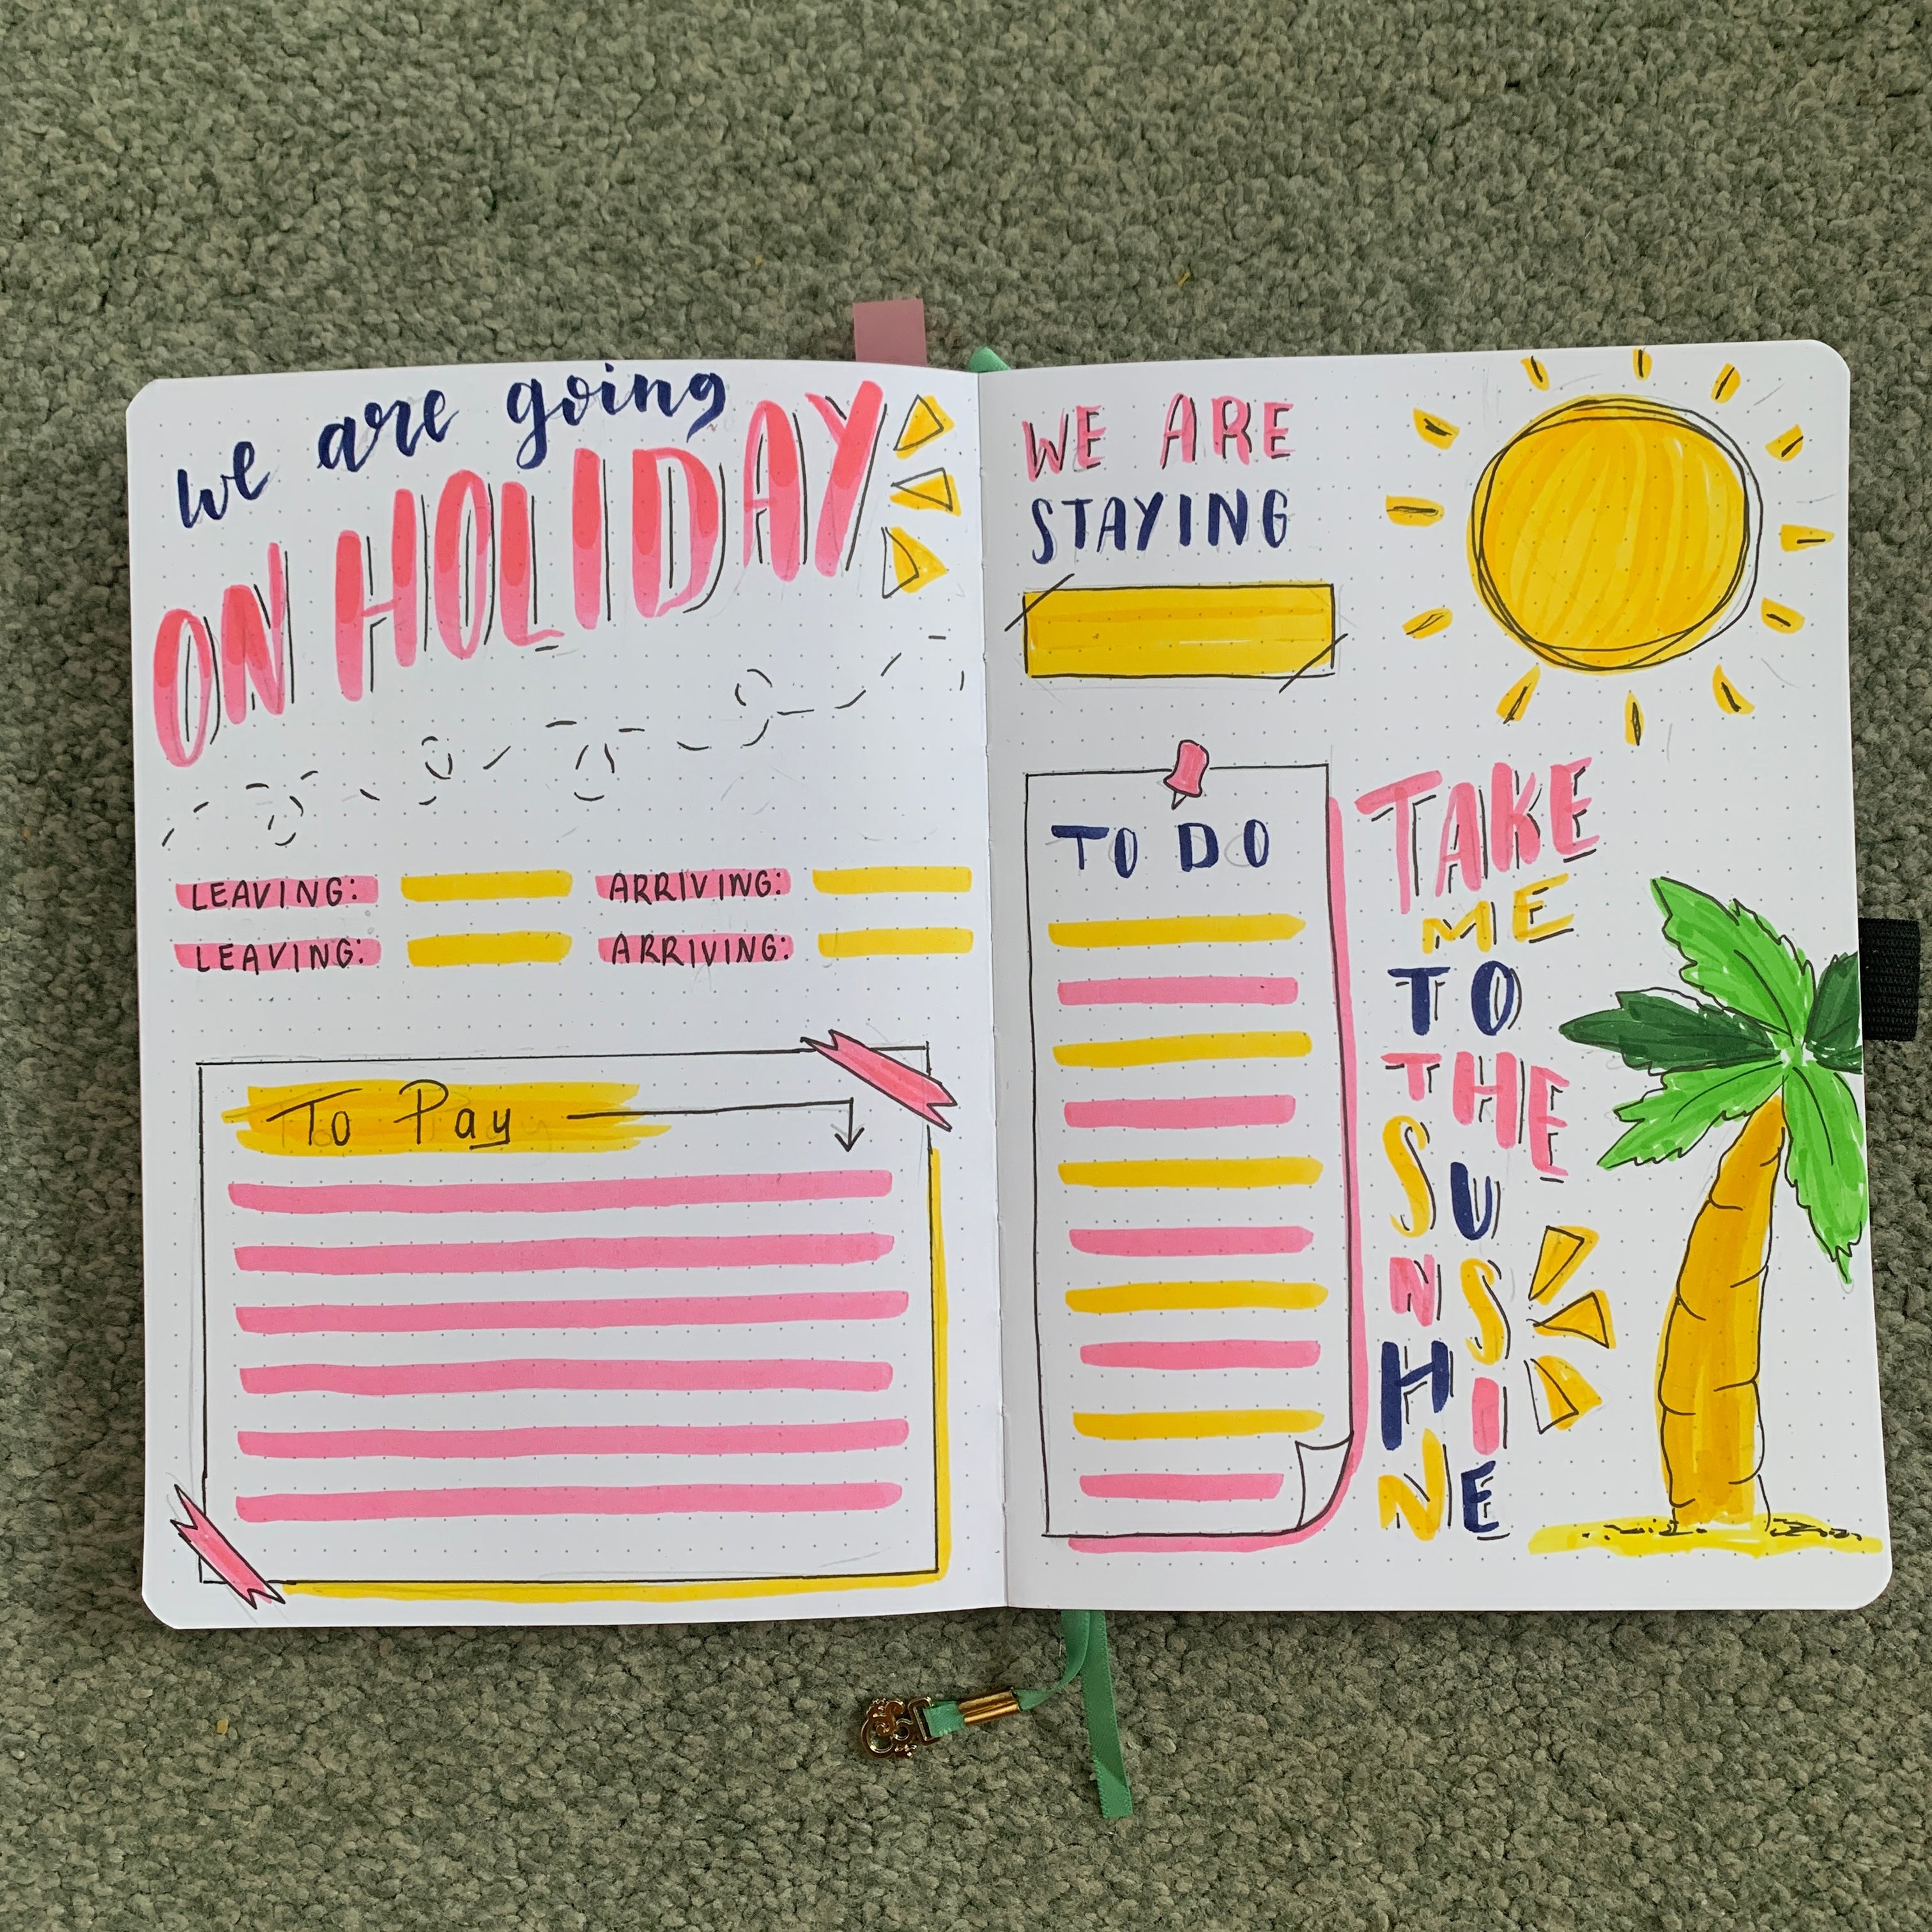 5 tips for your travel journal